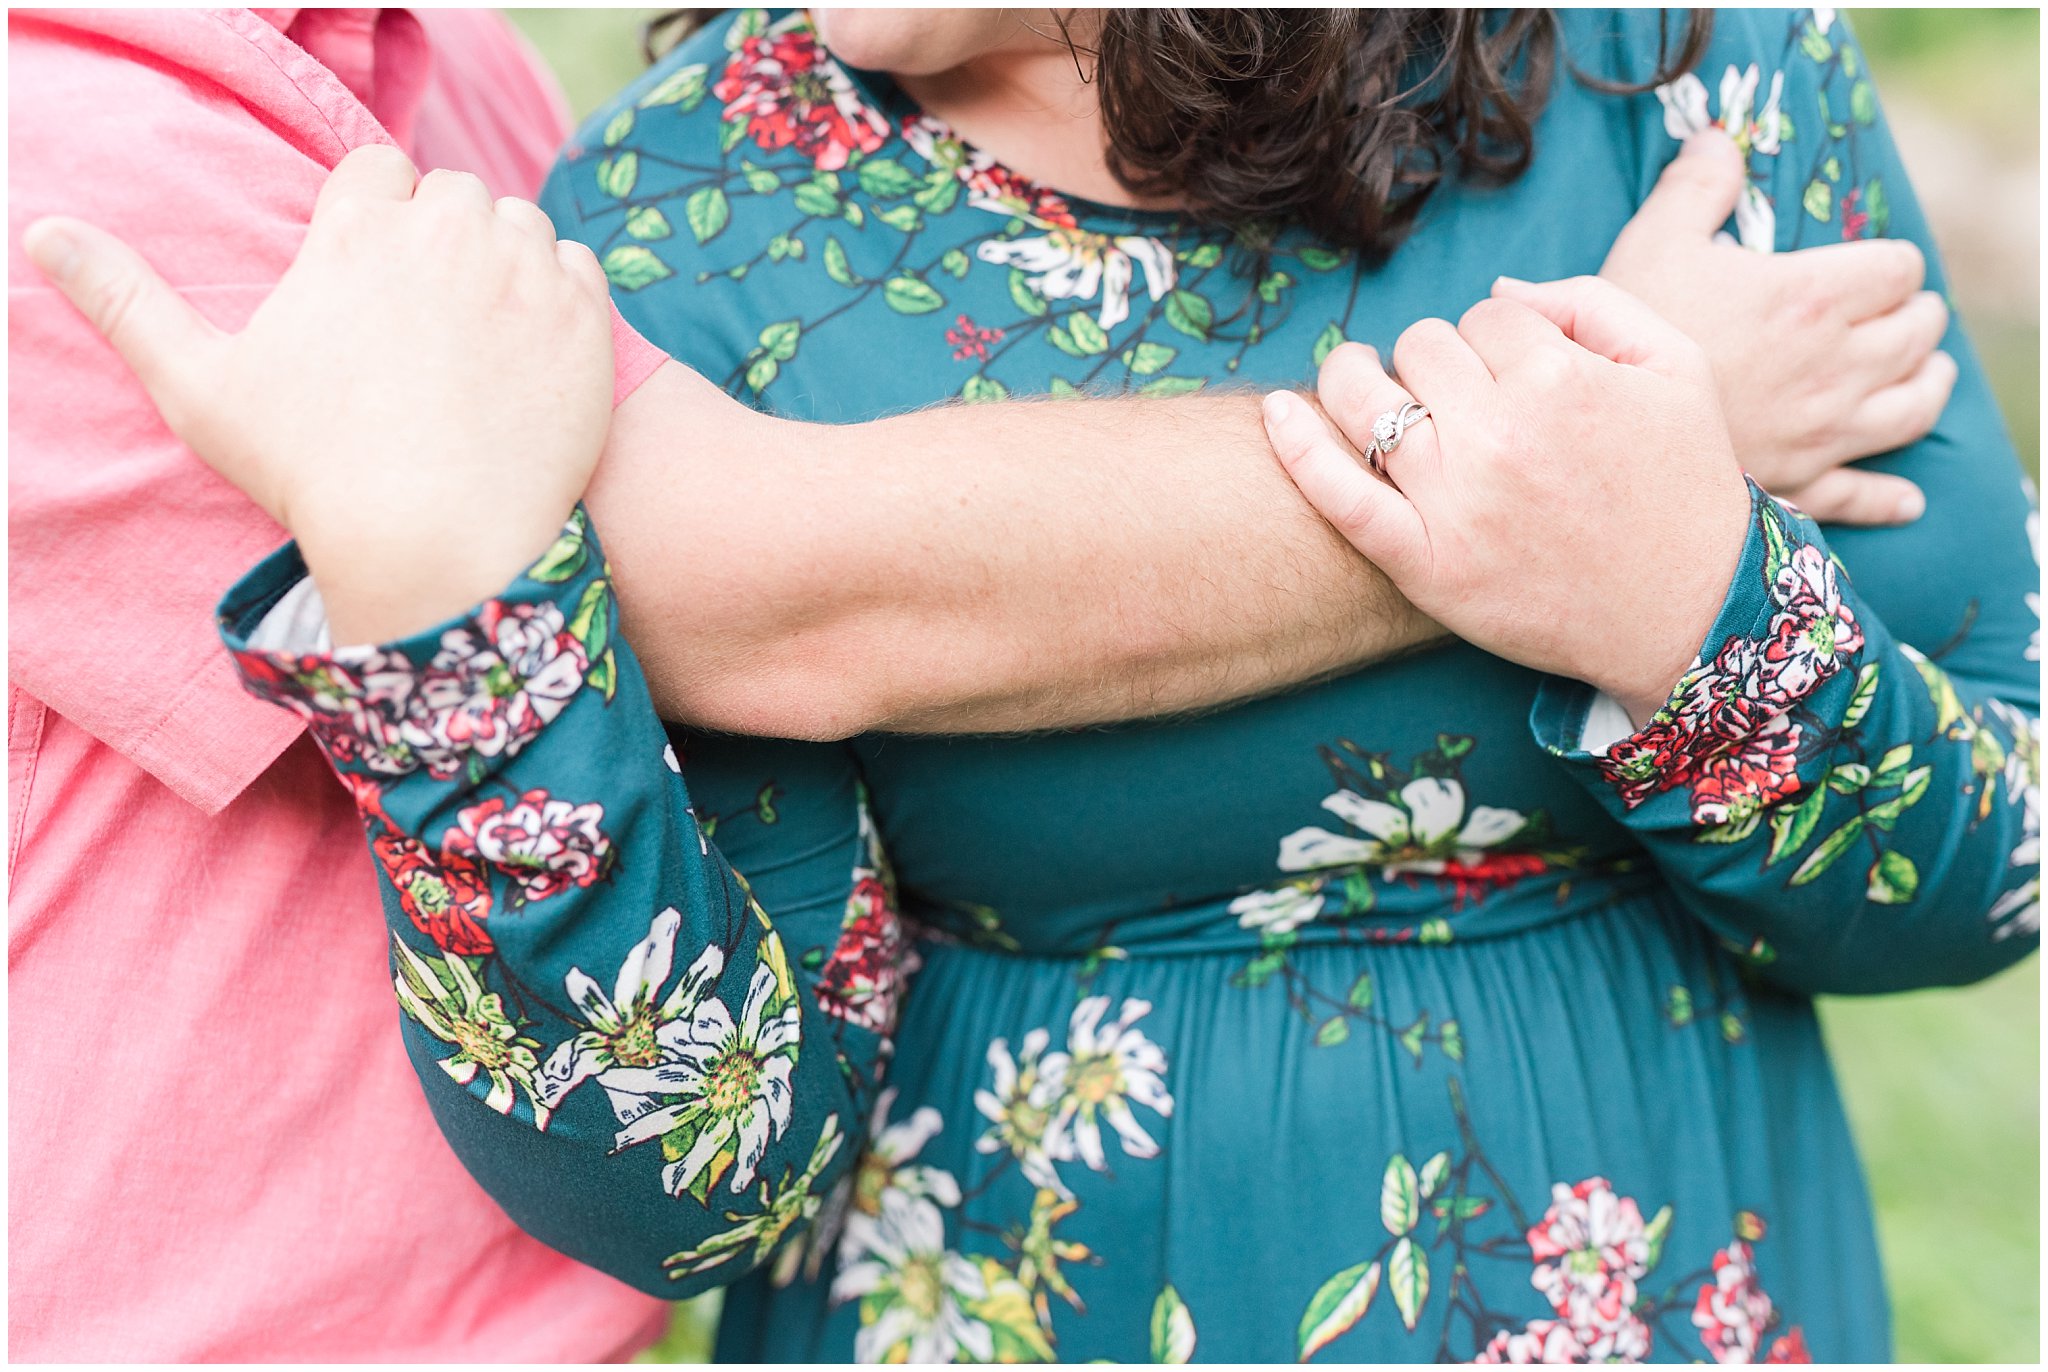 Couple in blue green floral dress and pink shirt by the Ogden river | Fort Buenaventura Summer Engagement Session | Jessie and Dallin Photography